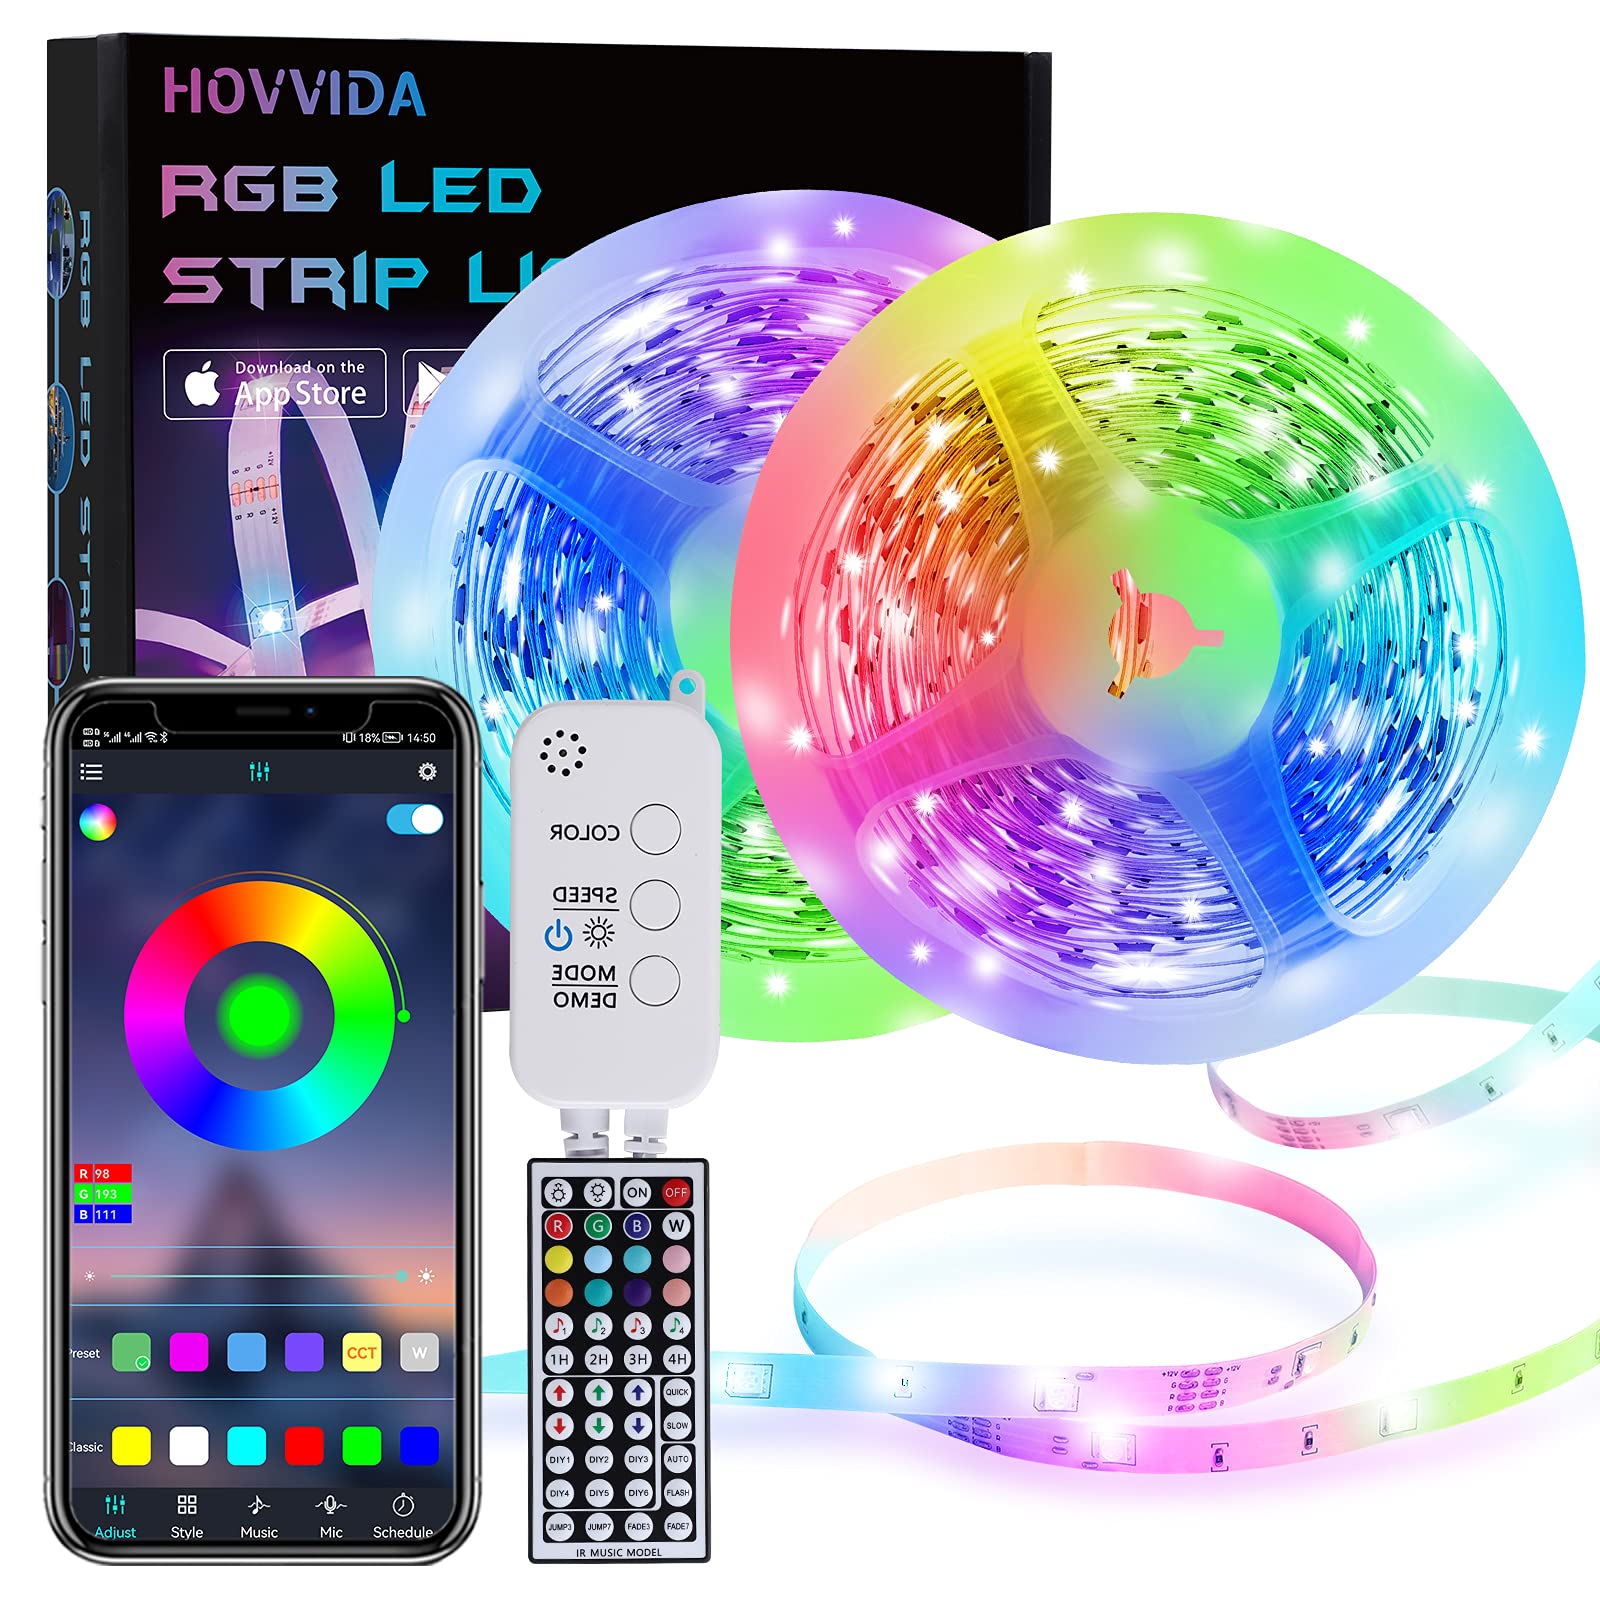 LED Strip Lights, HOVVIDA 15M RGB LED Strip with 44 Keys Remote Control, Music Sync, Controlled by APP, 16 Million Colors, Timing Mode, for Home, Party, Festival